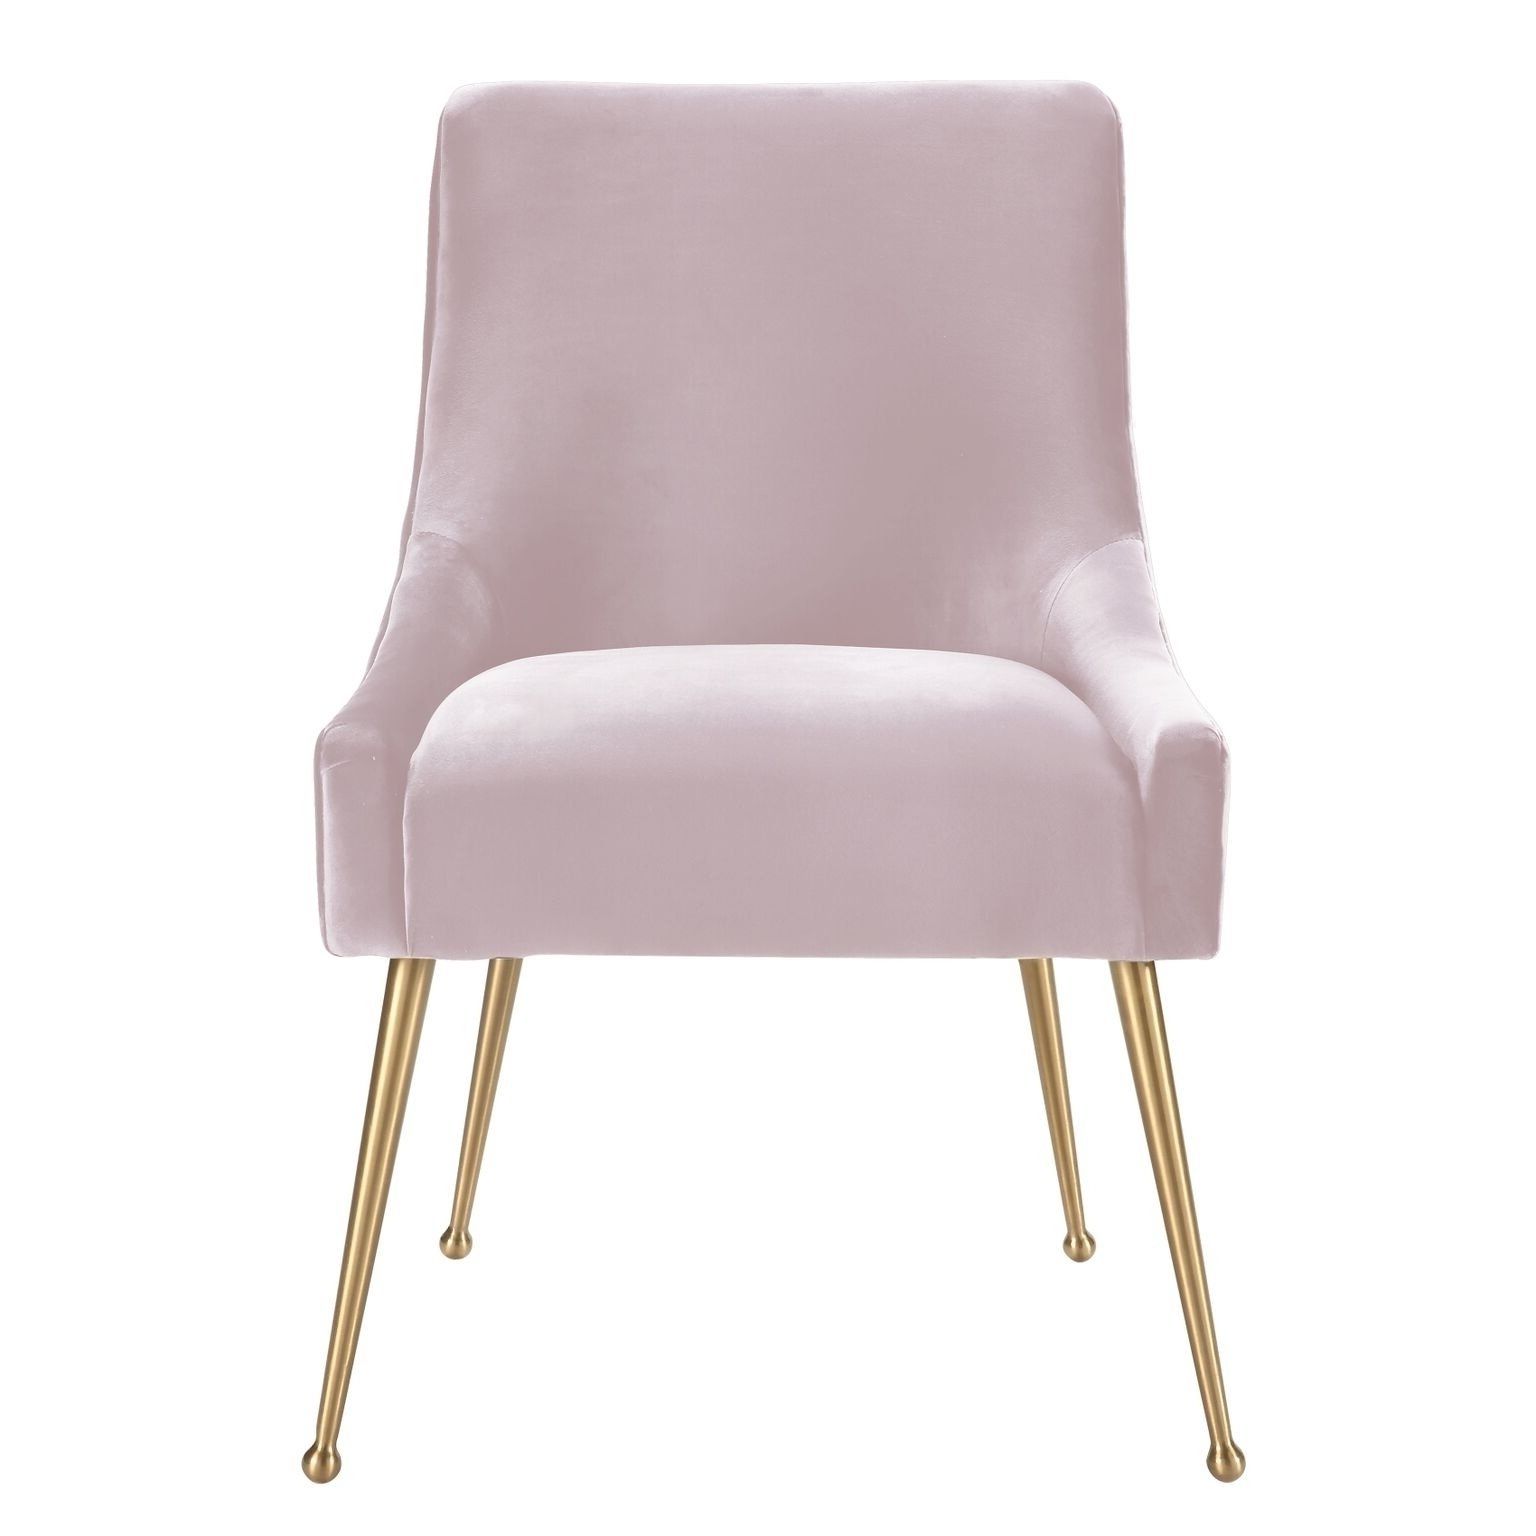 Pilo Grey Side Chairs Inside 2017 Shop Beatrix Blush Velvet Side Chair – Free Shipping Today (View 17 of 20)